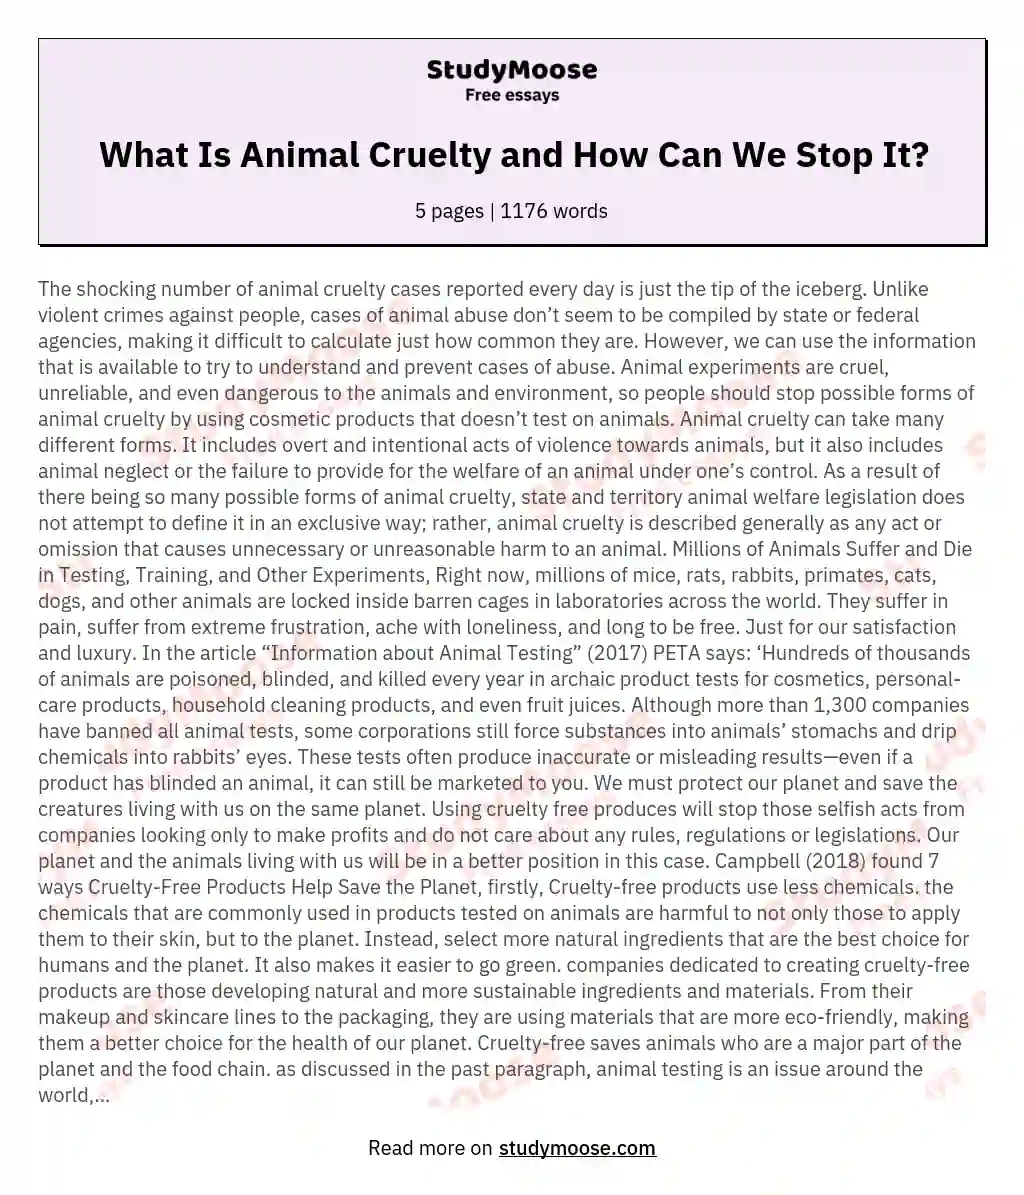 What Is Animal Cruelty and How Can We Stop It? Free Essay Example